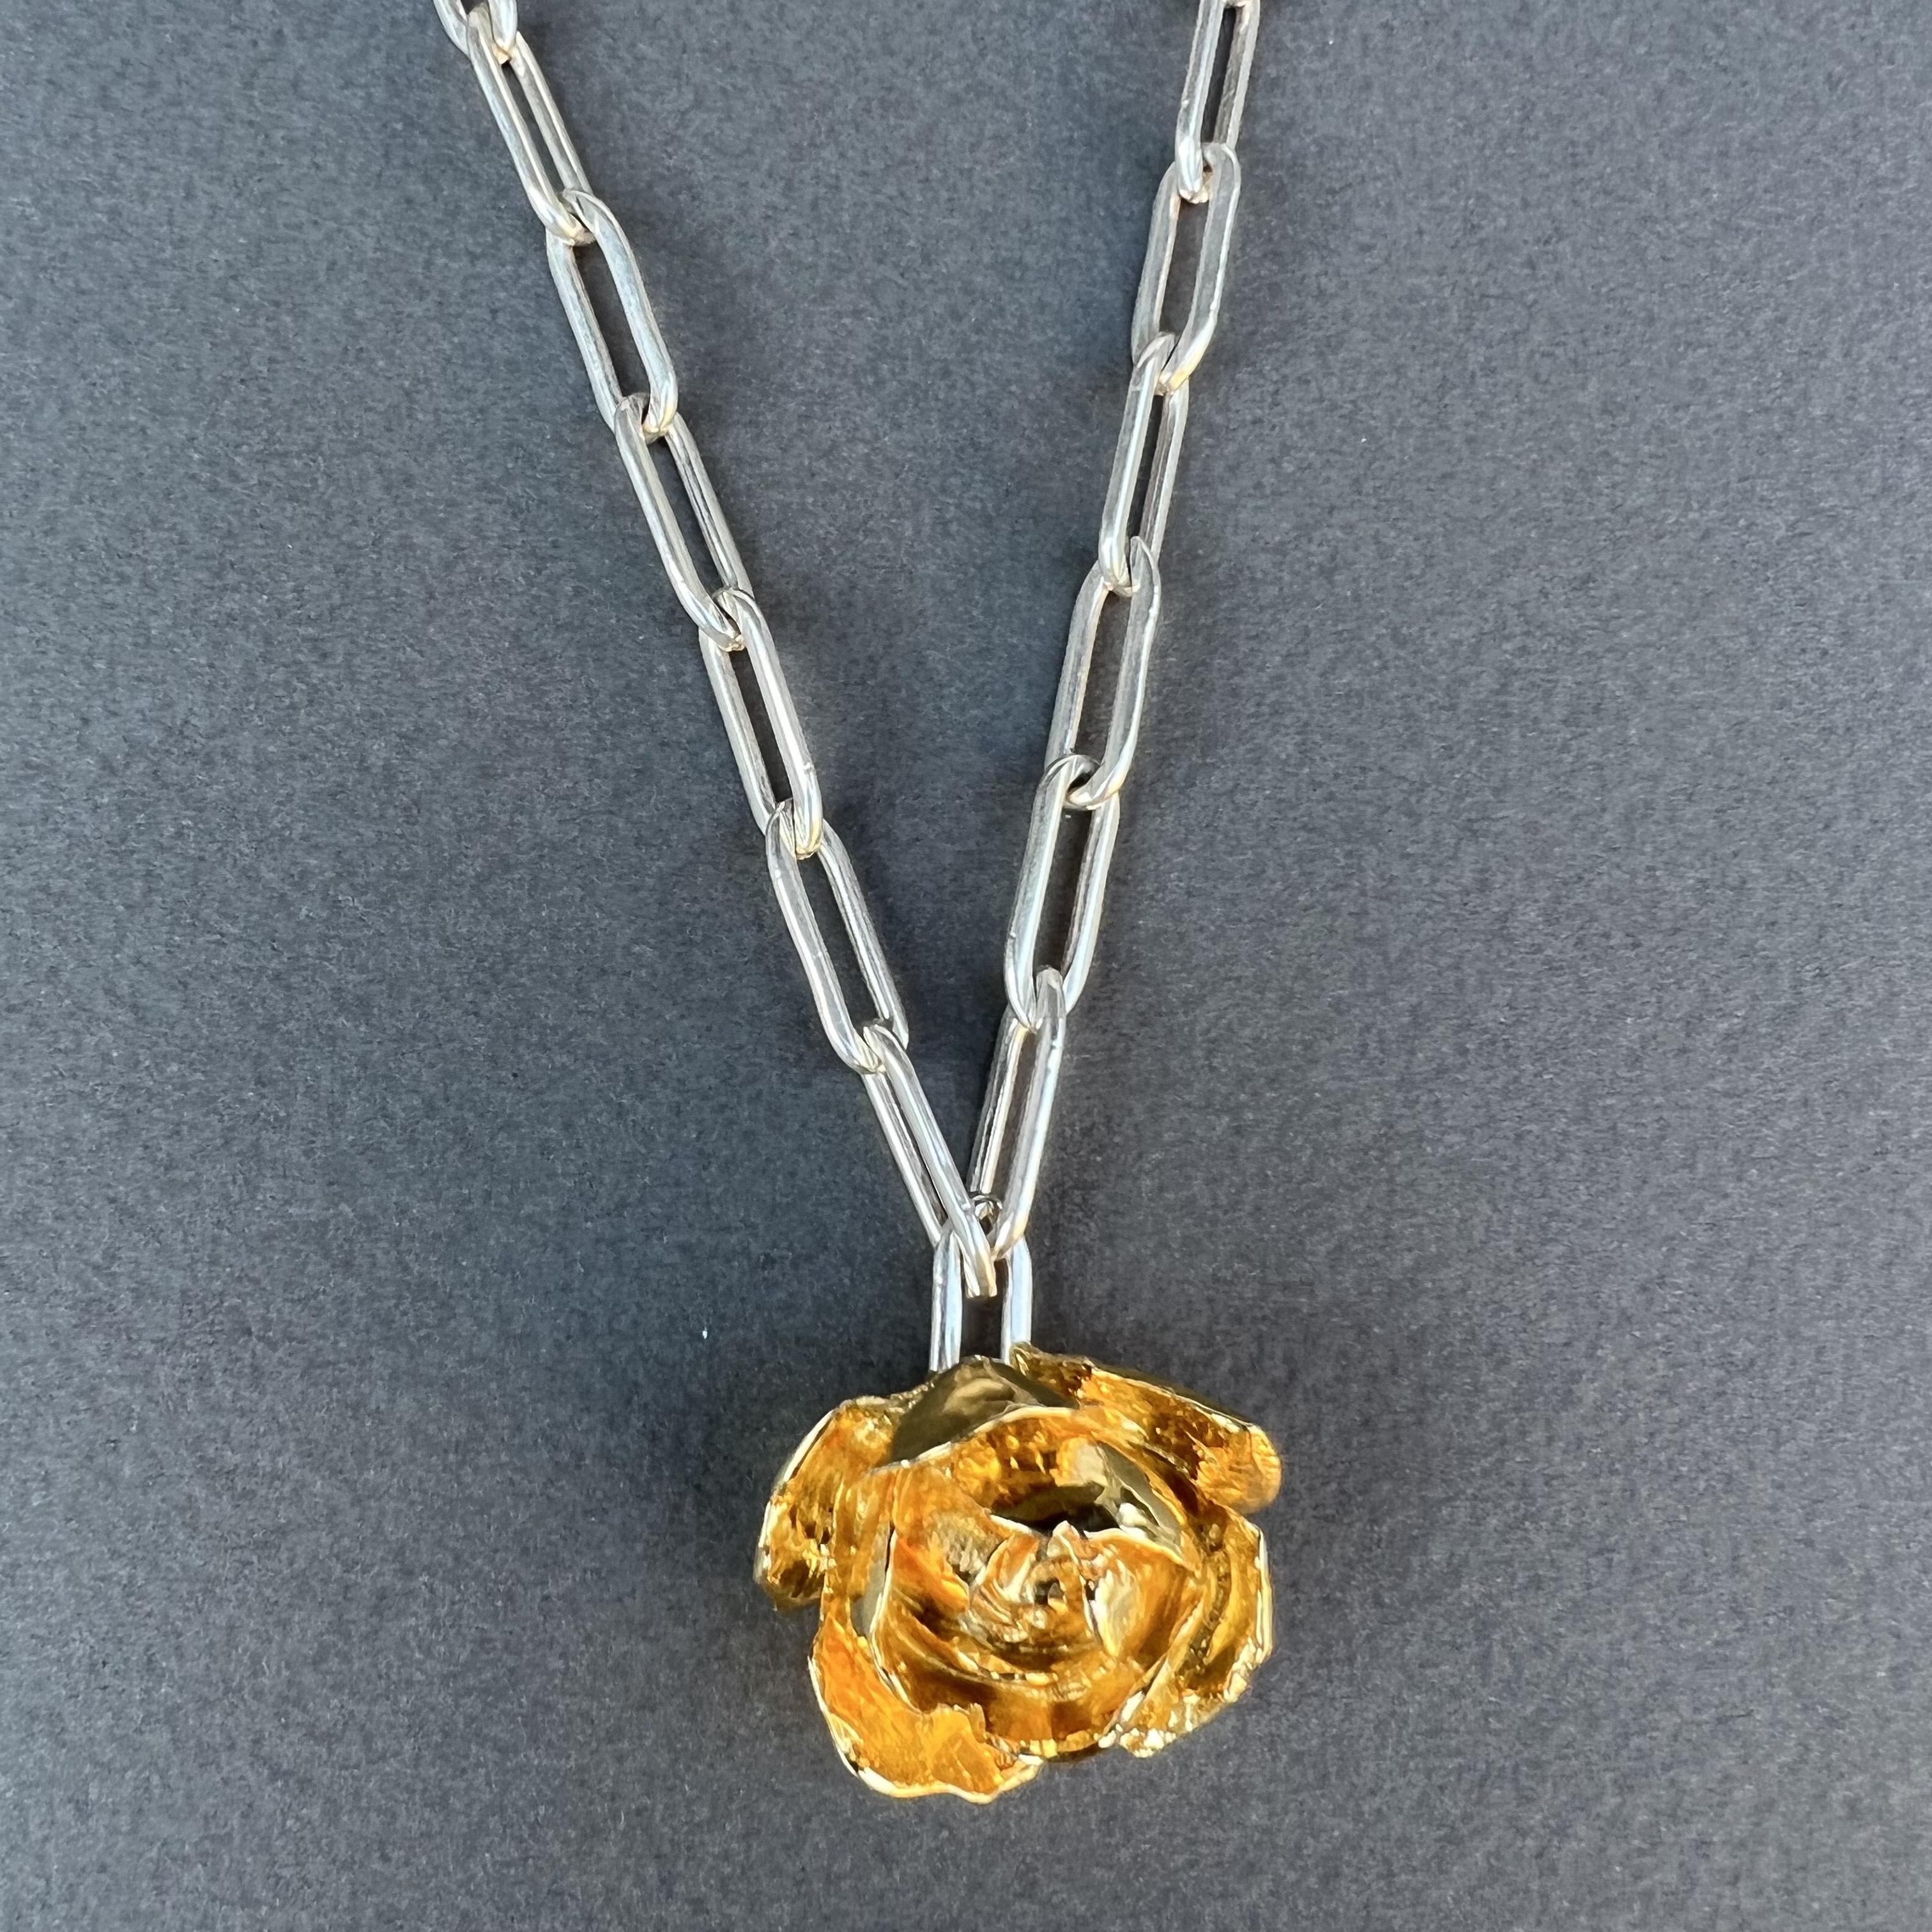 Rose Flower Necklace Love Sterling Silver Chain J Dauphin For Sale 1